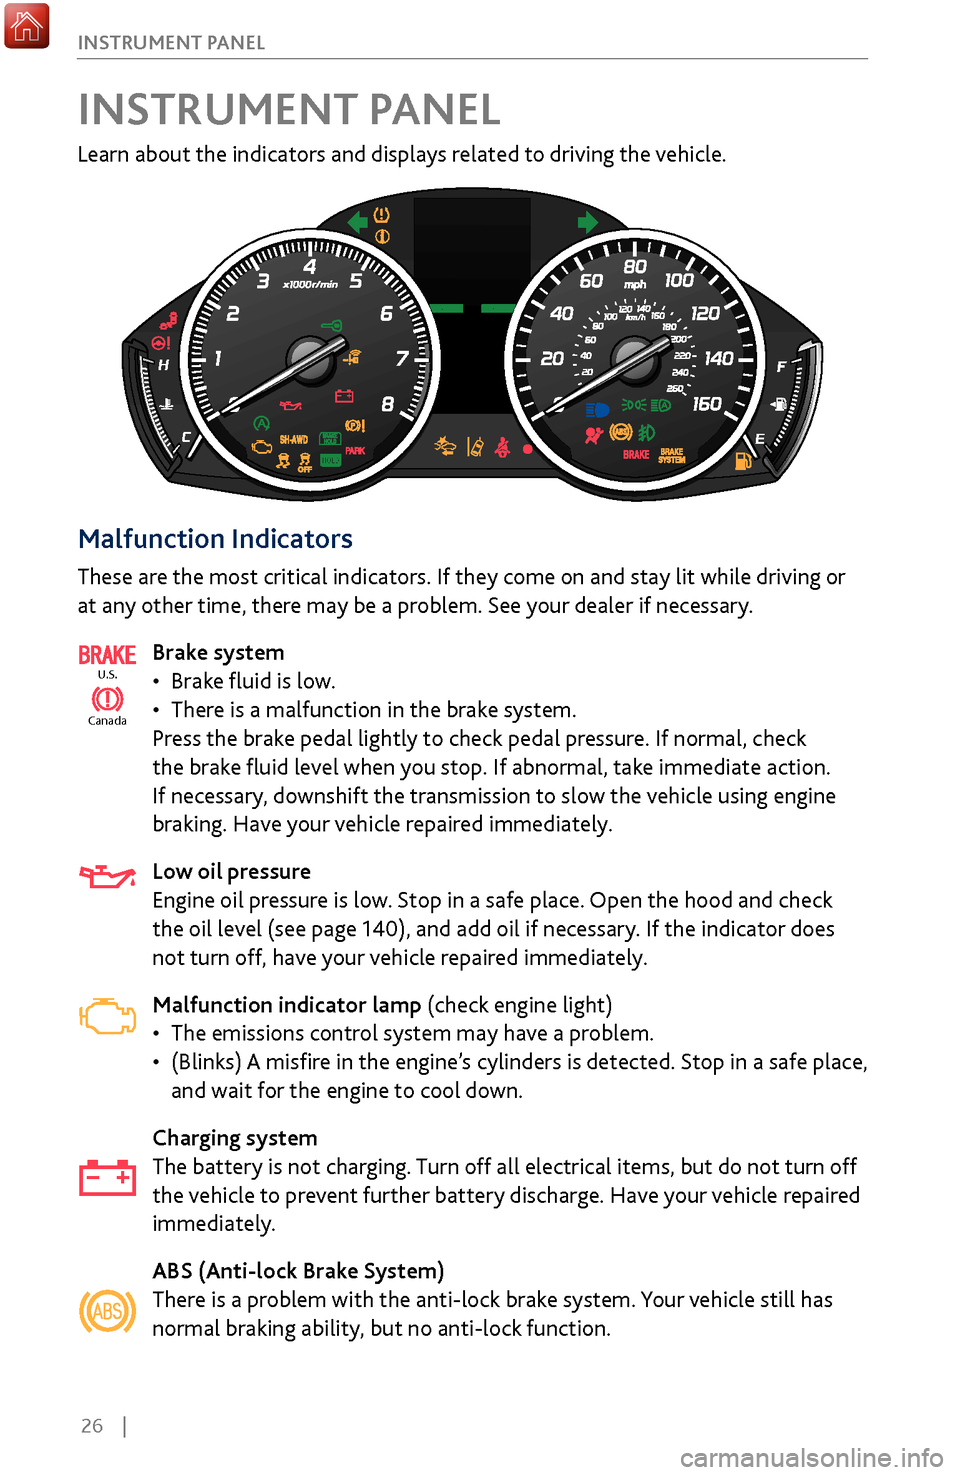 Acura MDX 2017  Owners Guide 26    |
I
NSTRUMENT PANEL
Learn about the indicators and displays related to driving the vehicle.
Malfunction Indicators
These are the most critical indicators. If they come on and stay lit while driv